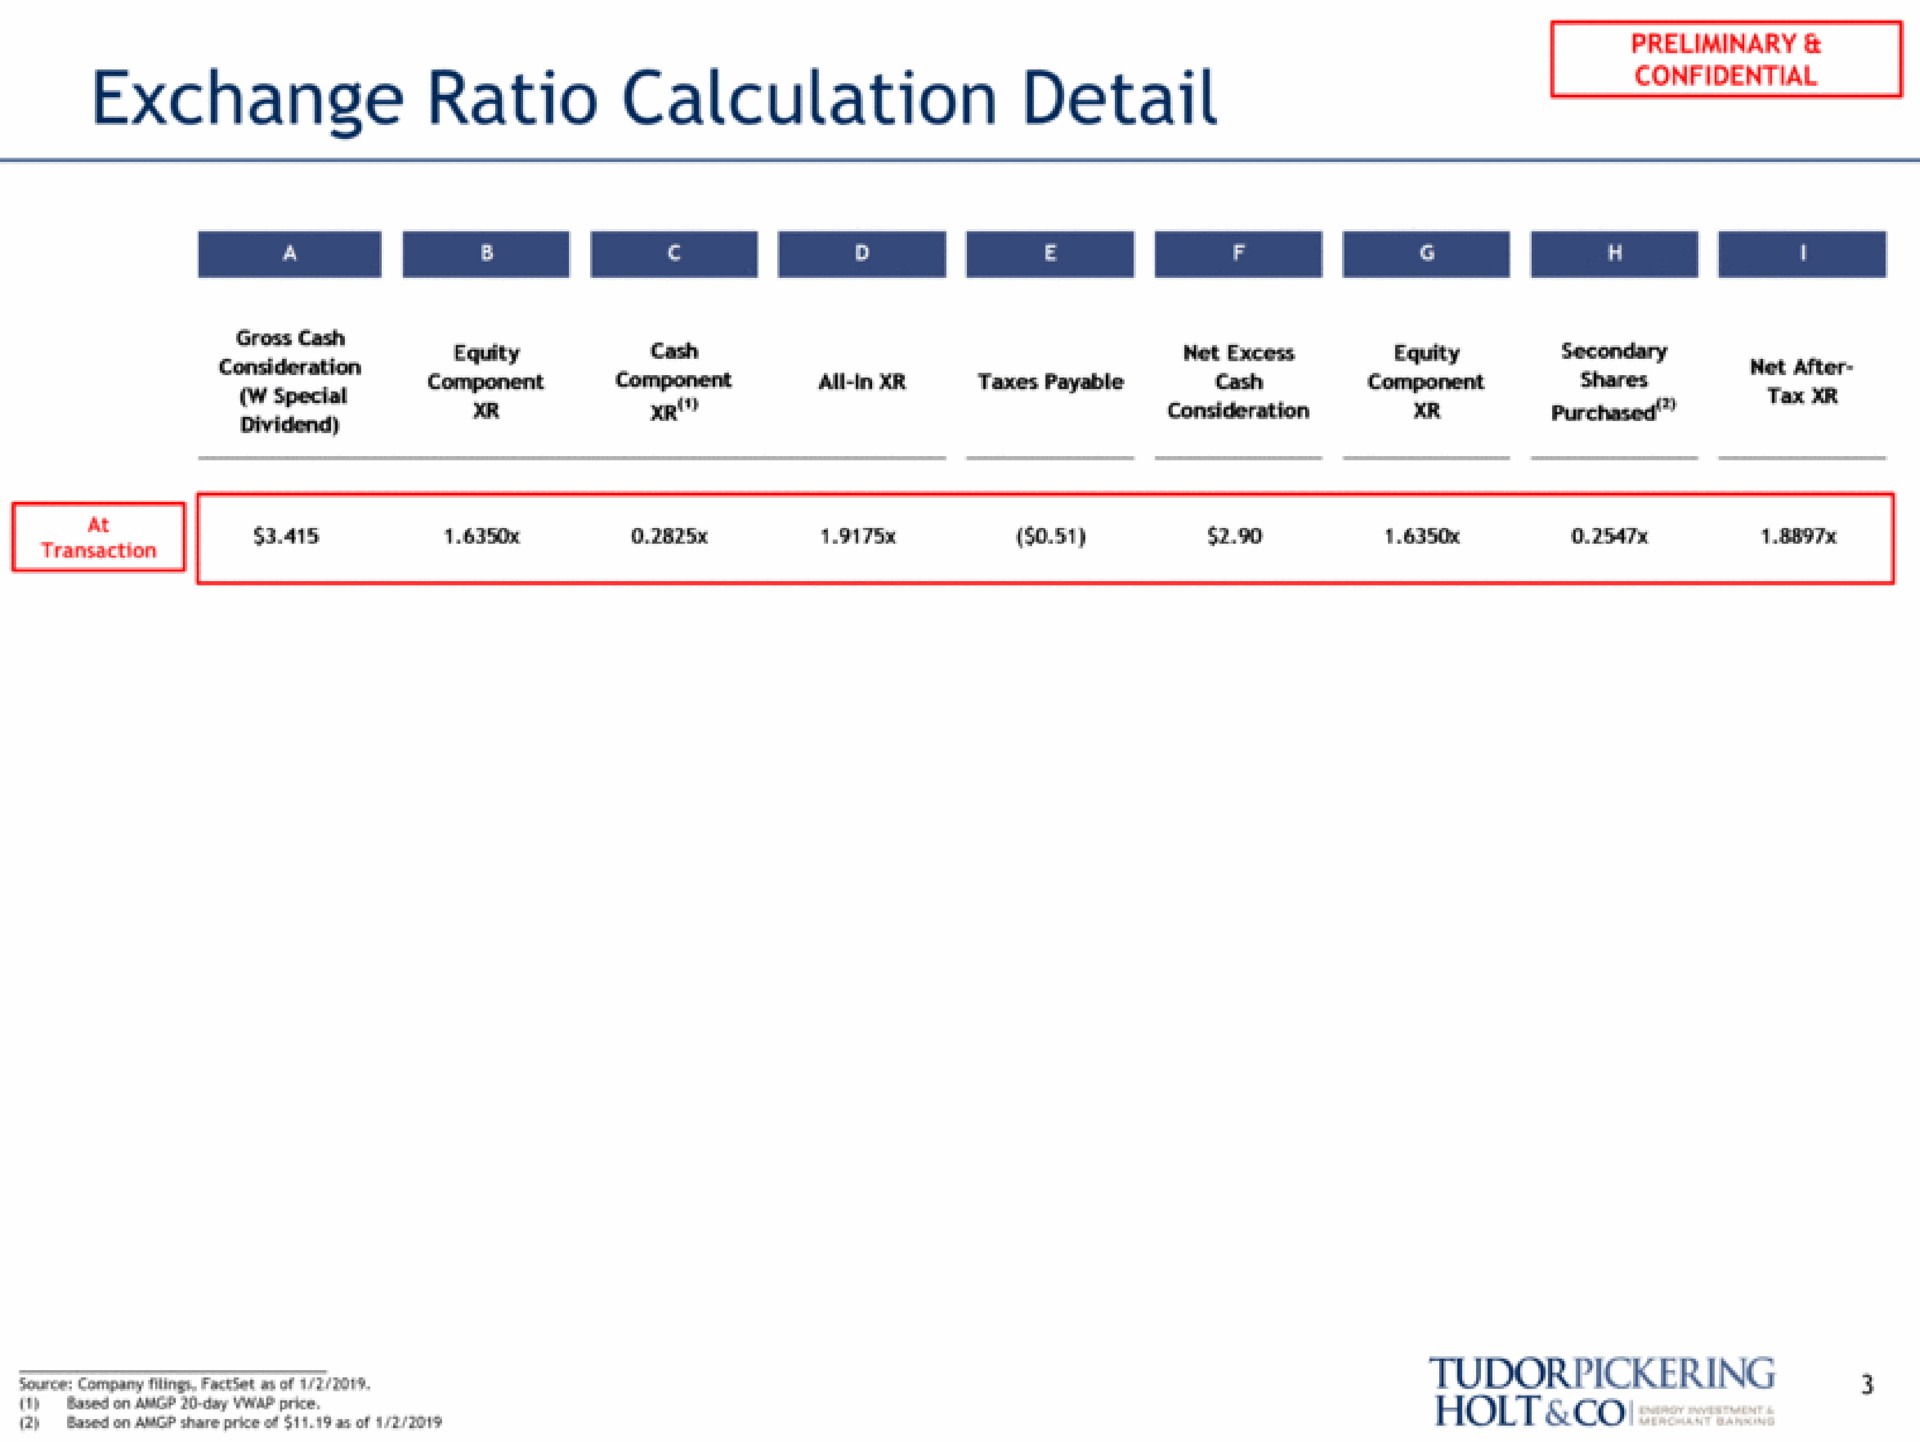 exchange ratio calculation detail confidential company tings | Tudor, Pickering, Holt & Co